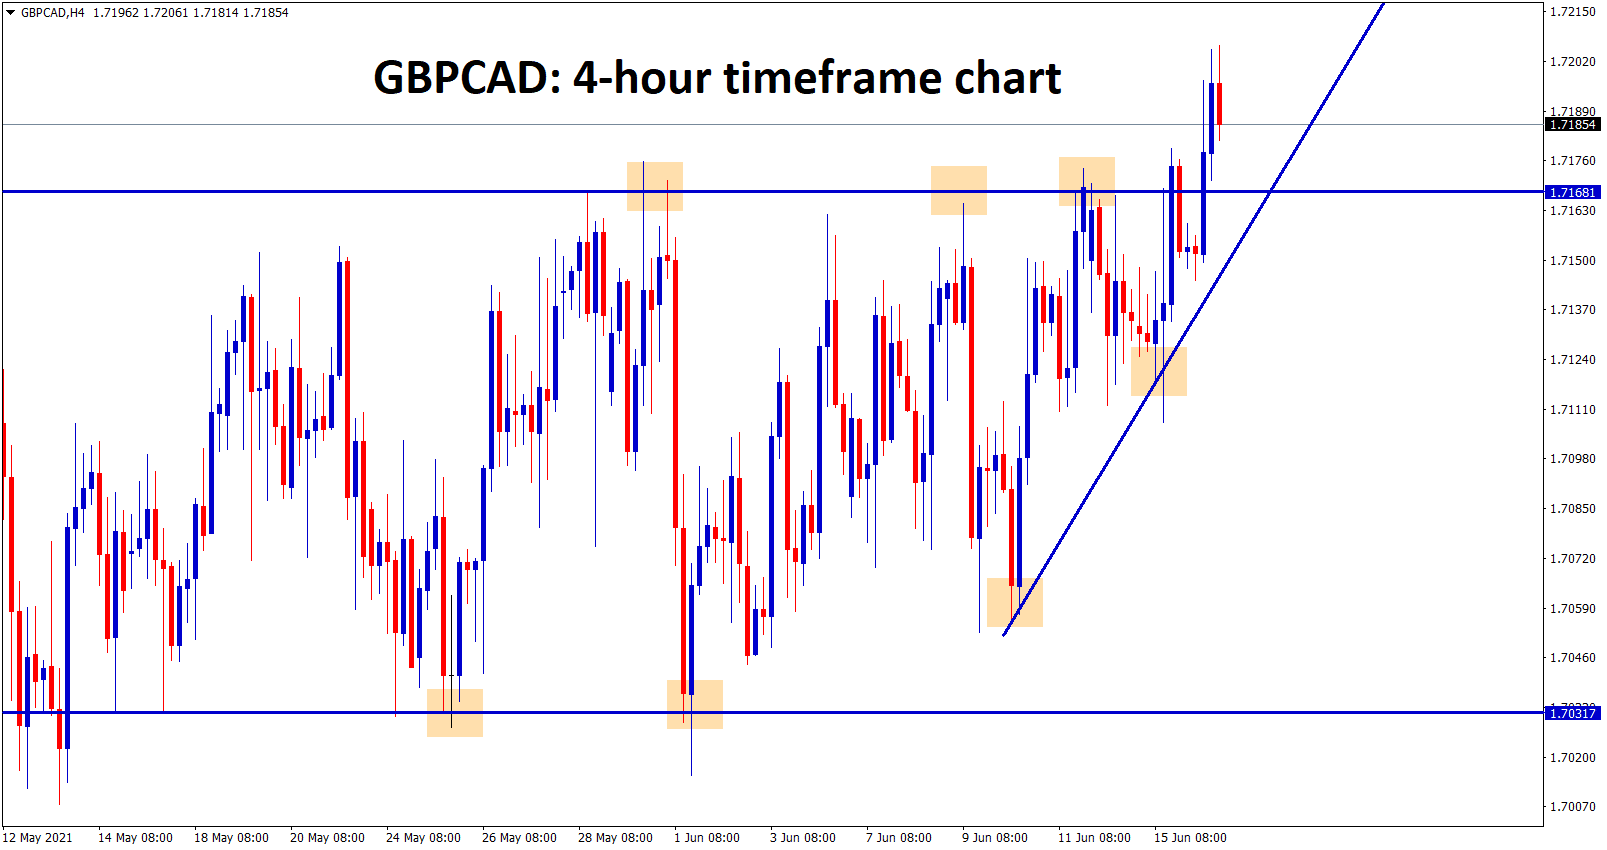 GBPCAD breaks the resistance after a long time